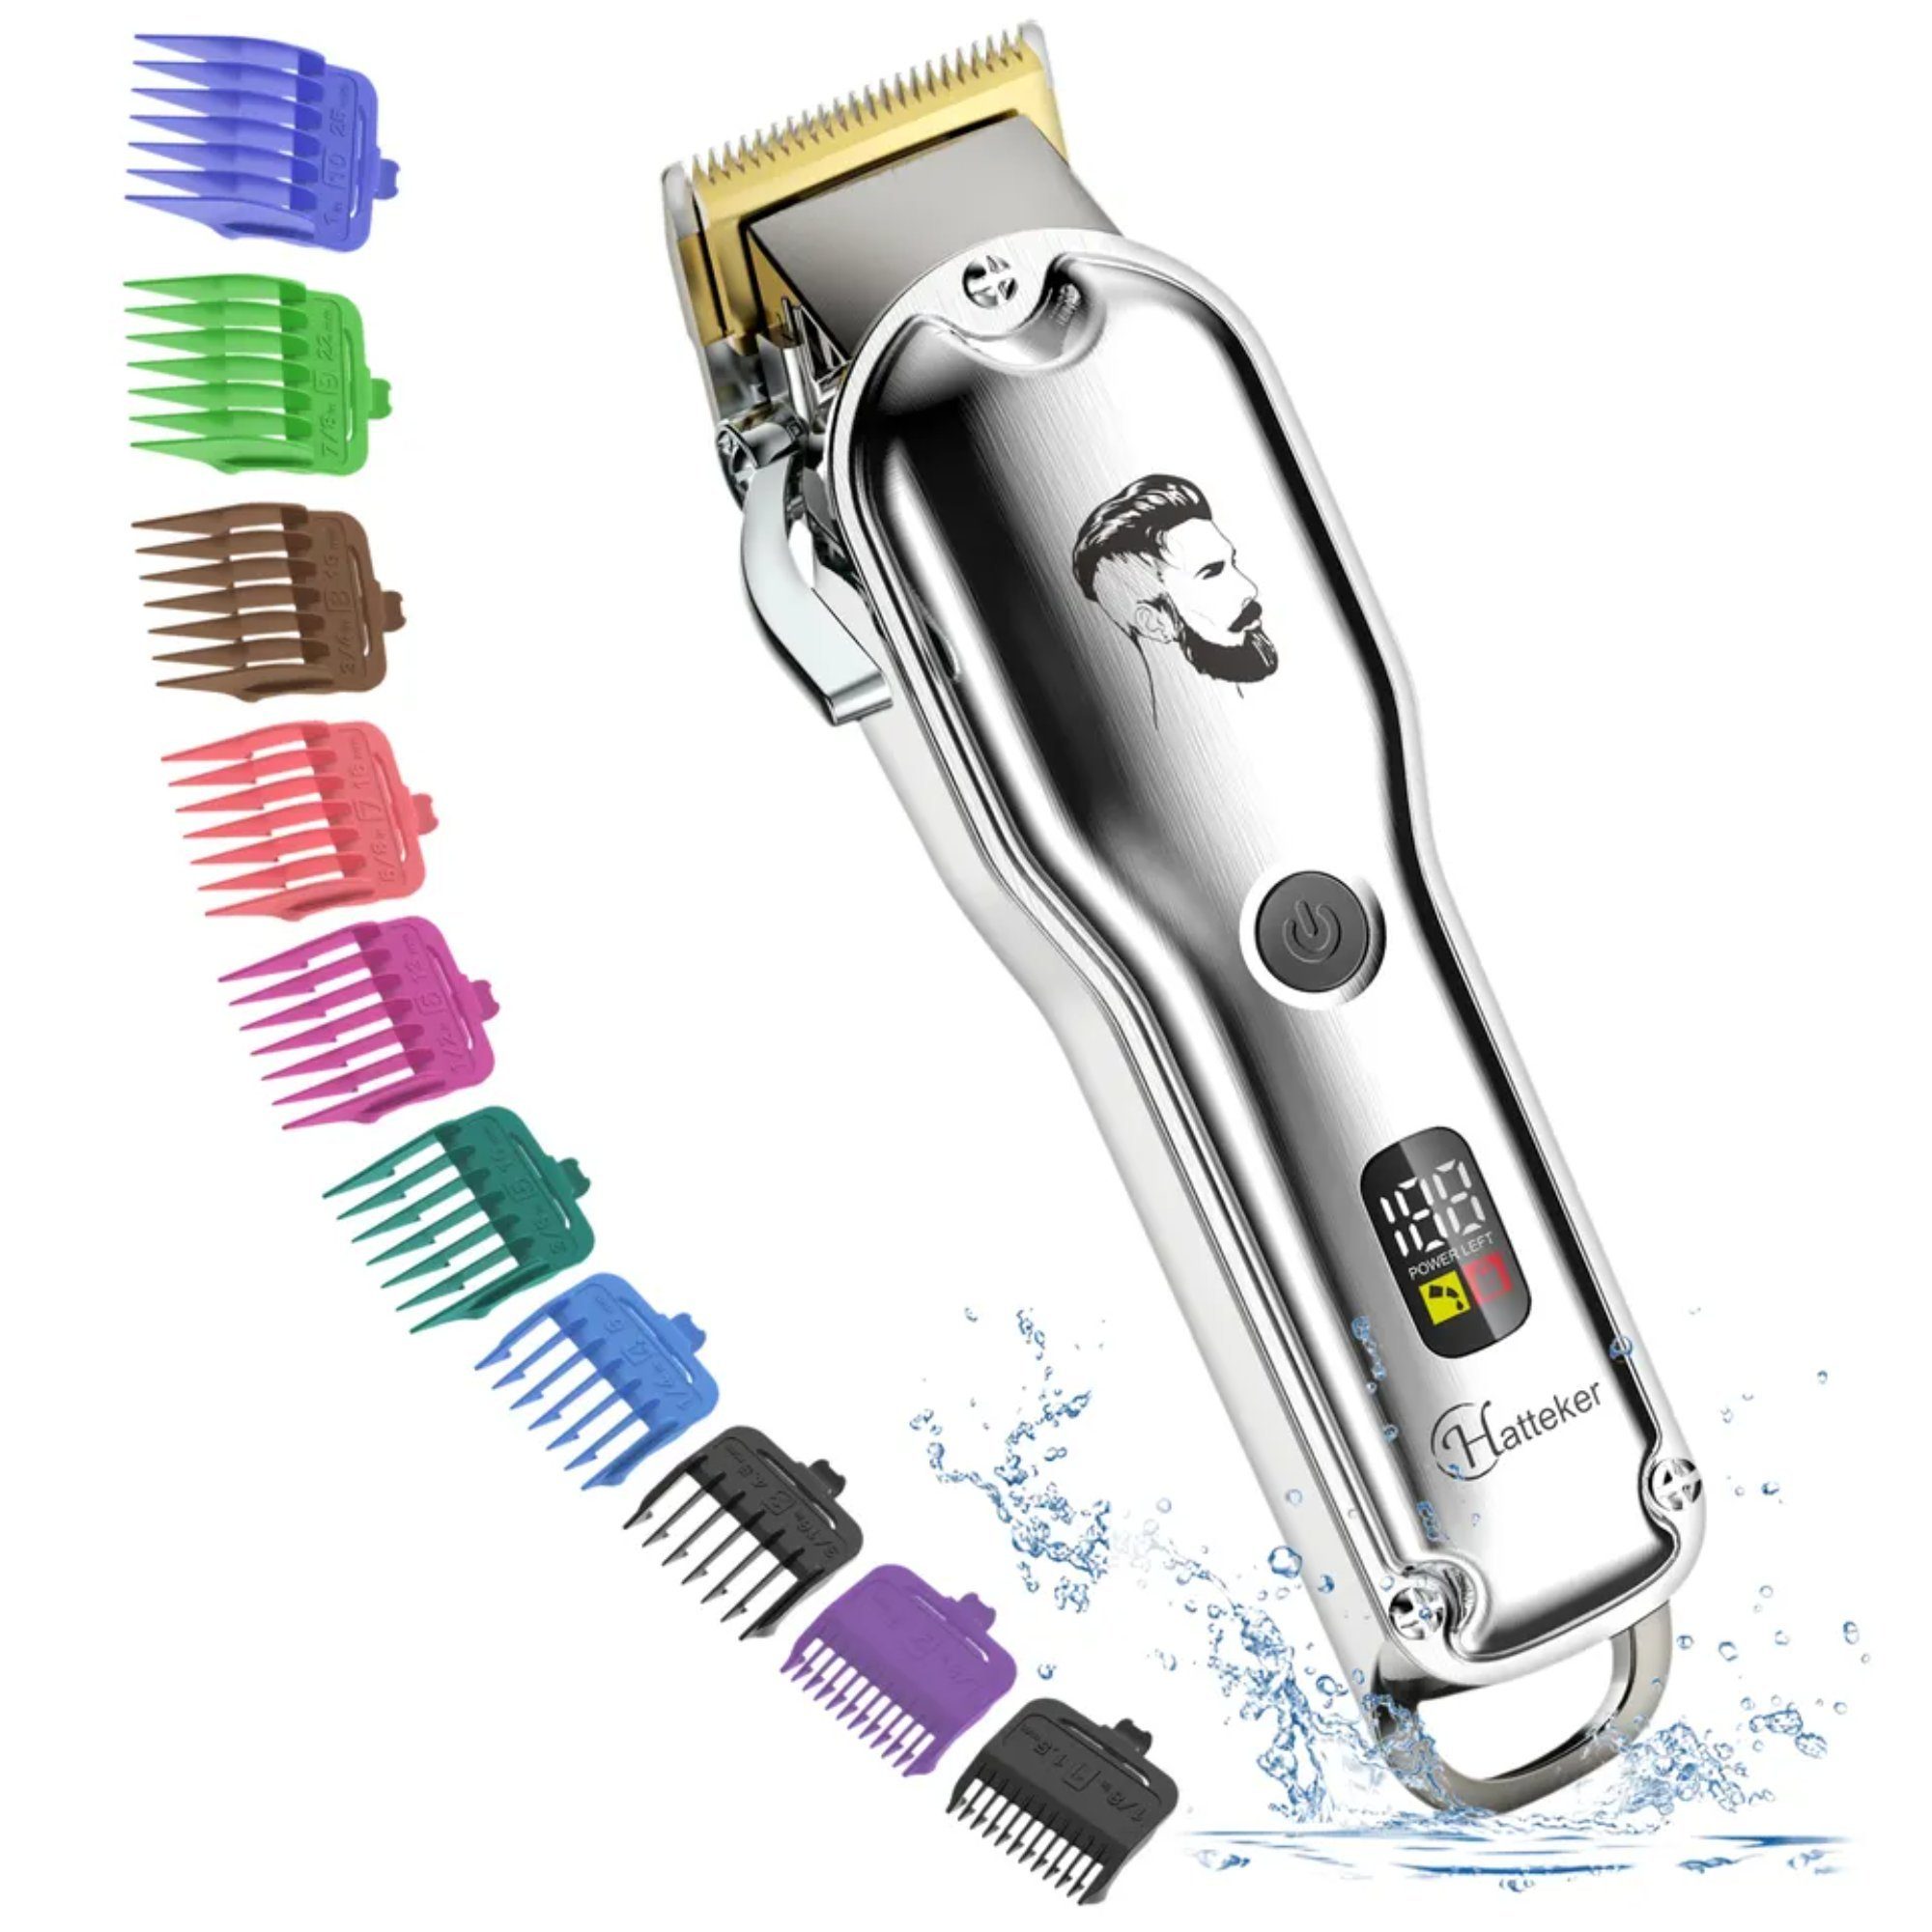 HATTEKER Beauty-Trimmer Professional Barbers Grooming Hair waschbar Colorful 2000 Combs Vollständig Rechargeable, Kit Clippers, mAh